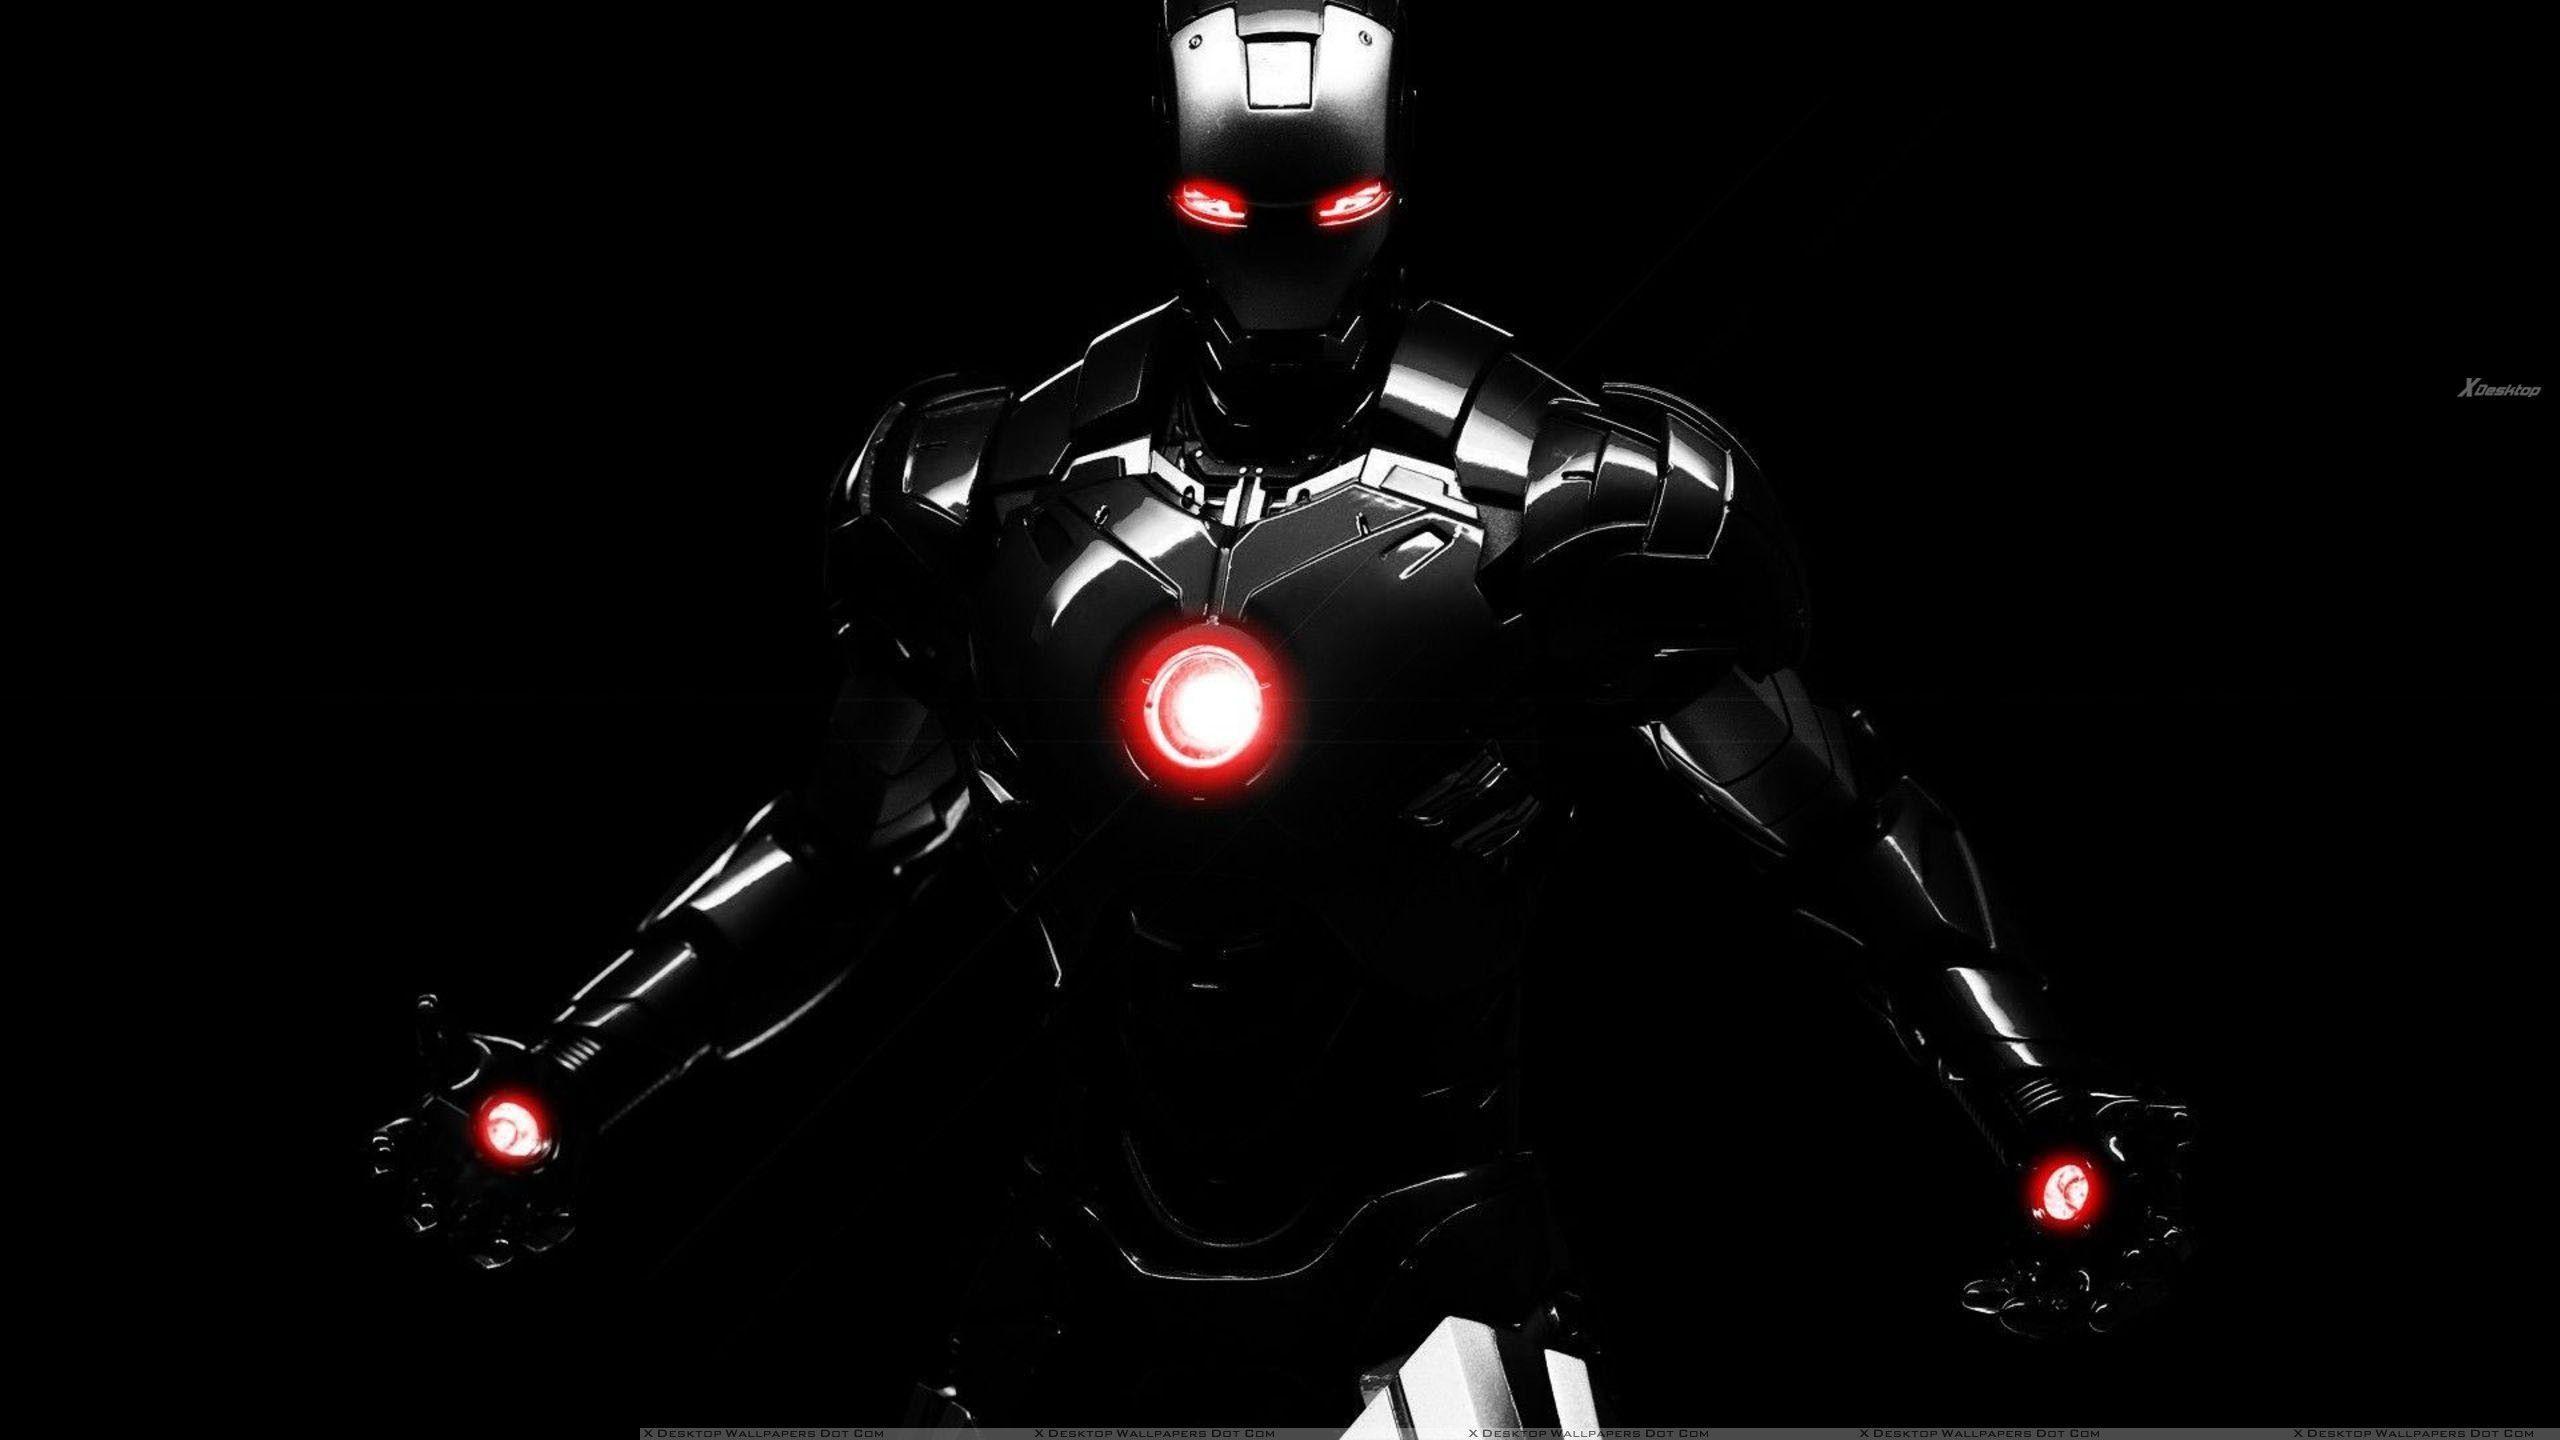 Iron Man Suits Wallpaper Free Iron Man Suits Background